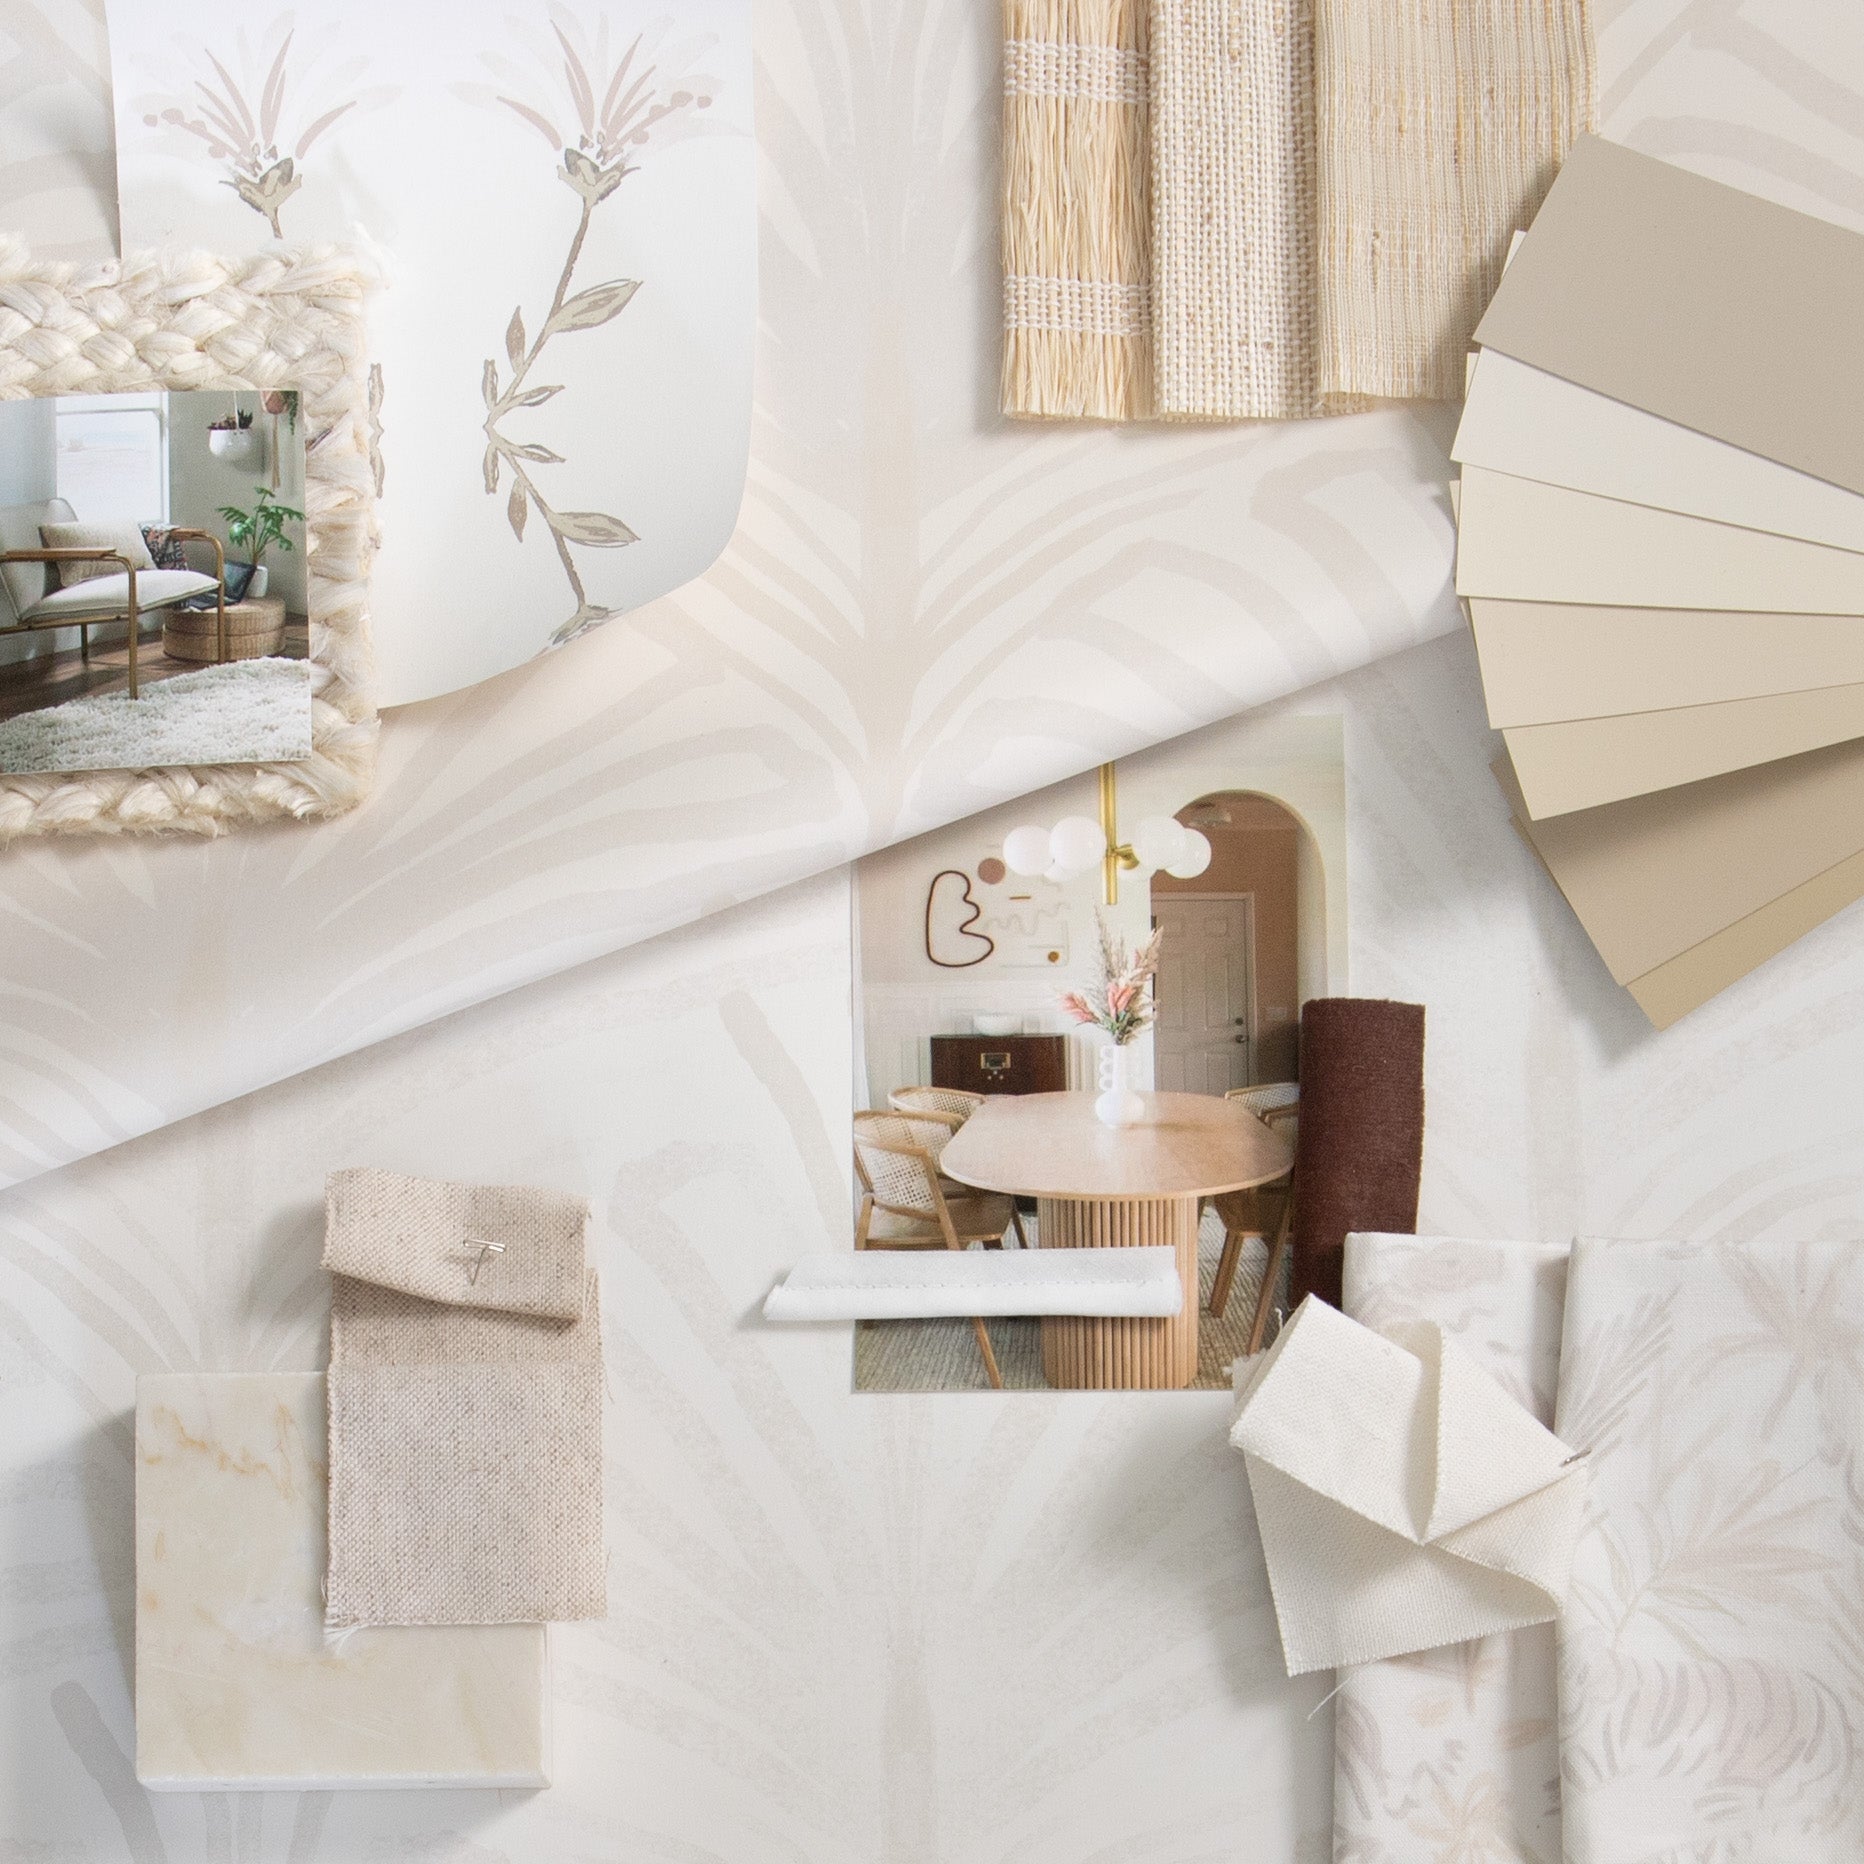 Interior design moodboard and fabric inspirations with Beige Chinoiserie Tiger Printed Swatch, Beige Botanical Stripe Printed Swatch, and Natural White Linen Swatch